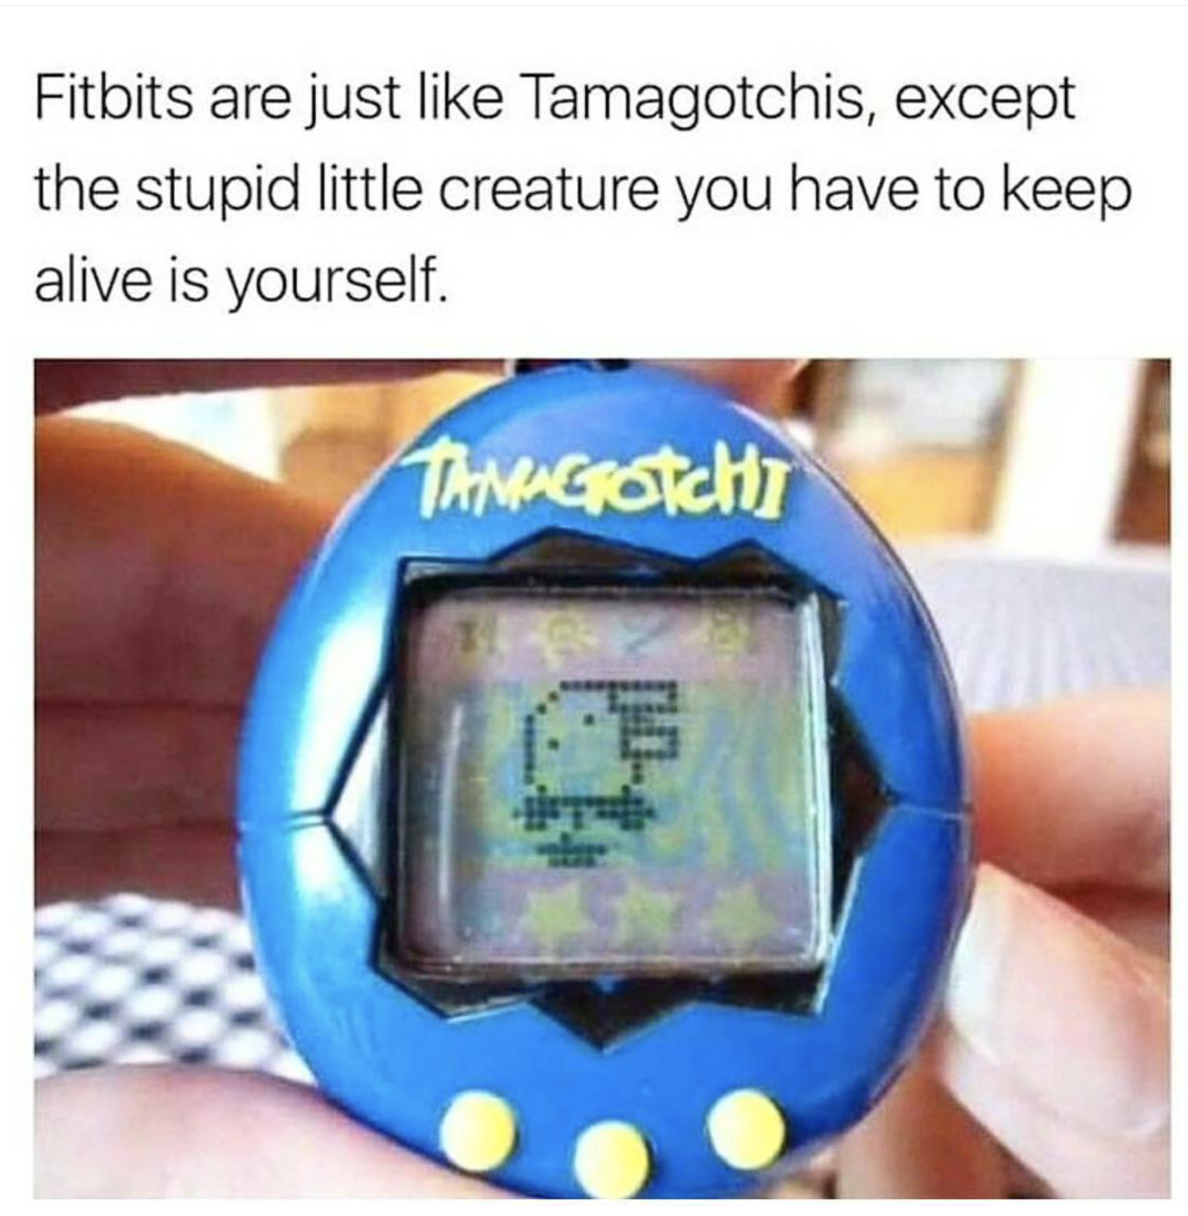 memes - fitbits are just like tamagotchis - Fitbits are just Tamagotchis, except the stupid little creature you have to keep alive is yourself. Timcotchi